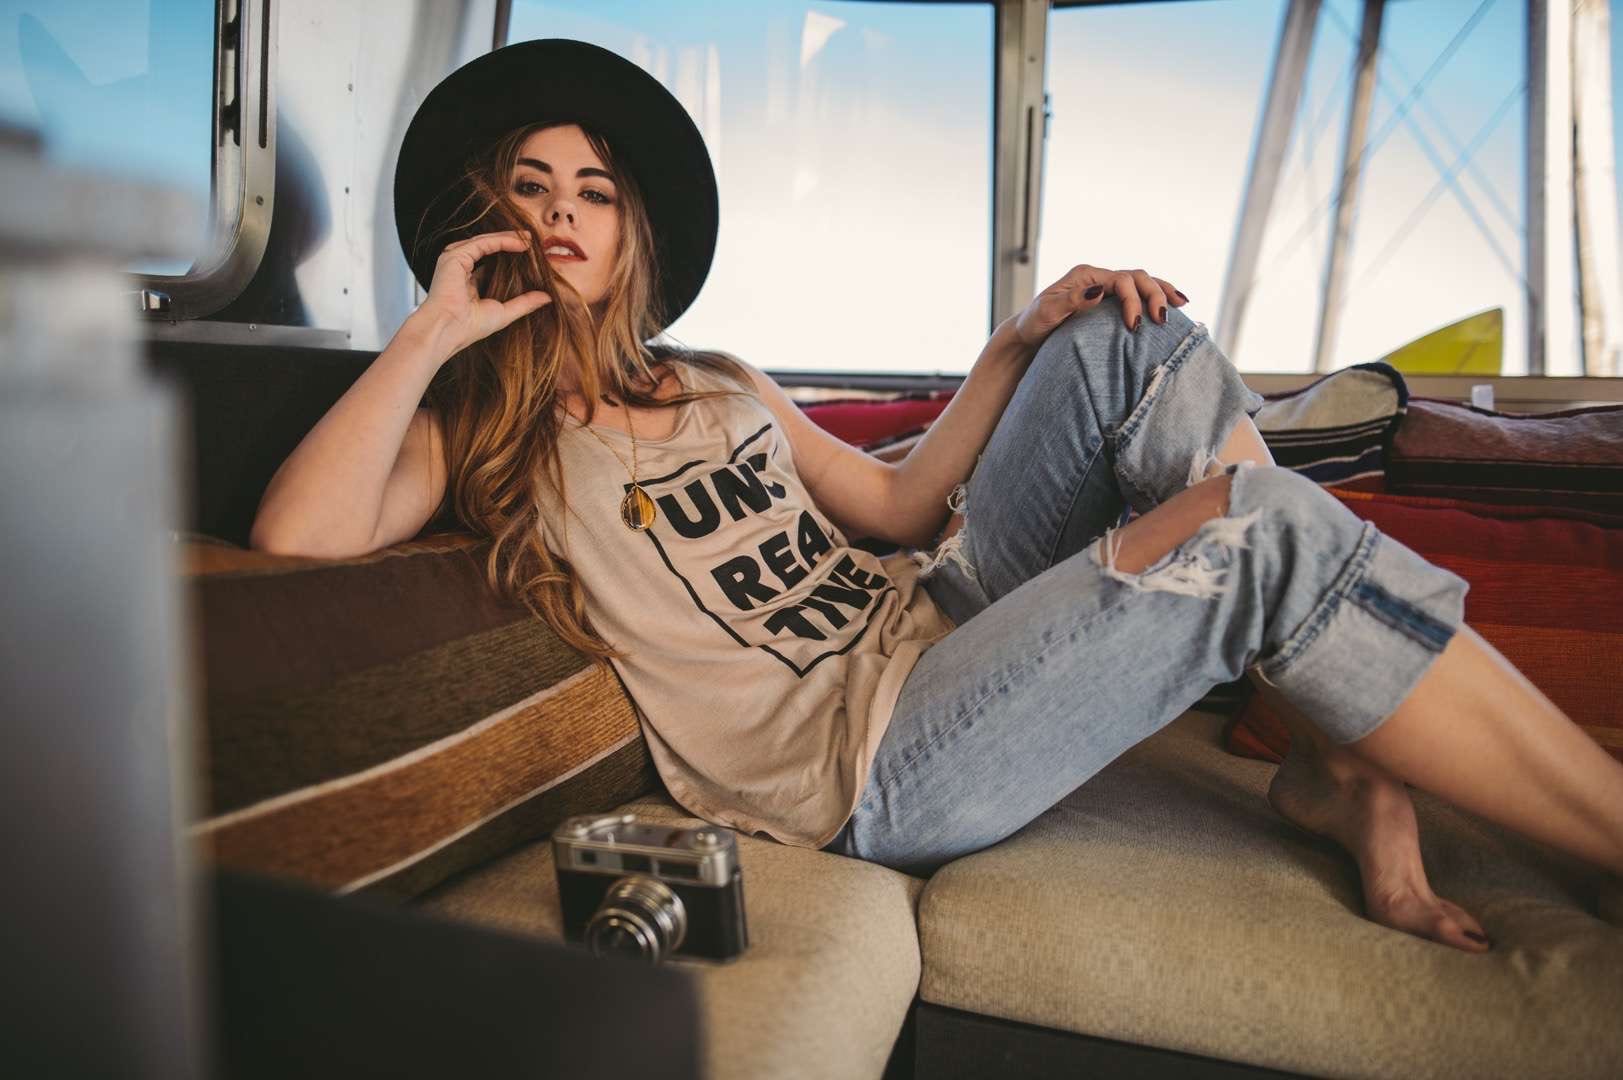 Young woman with long blond hair wearing a black tshirt and jean capris posing for camera from inside a RV with a camera nearby.